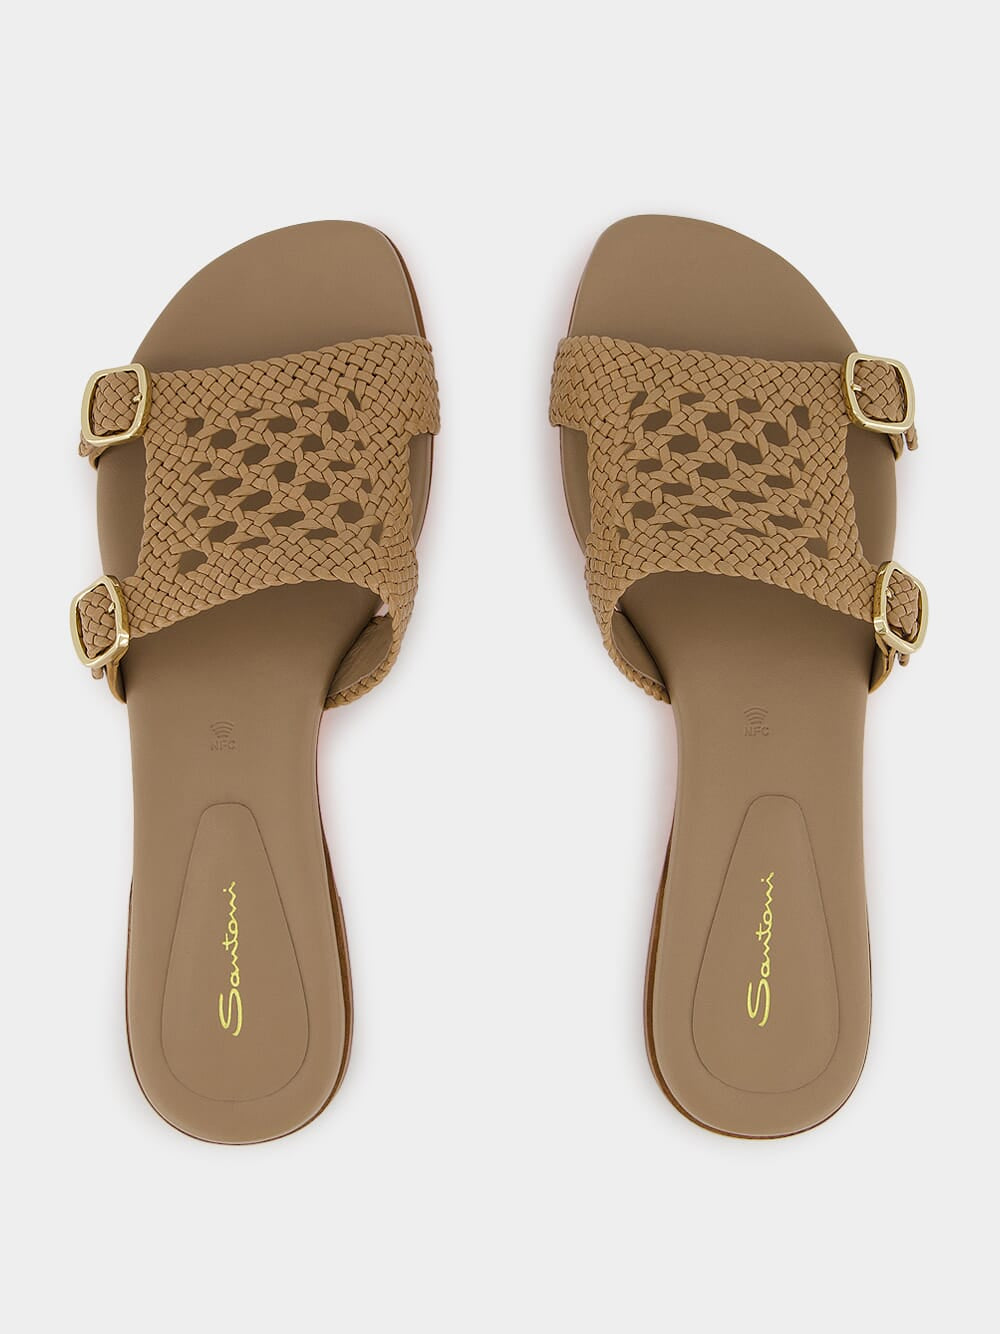 Woven Leather Slide Sandals